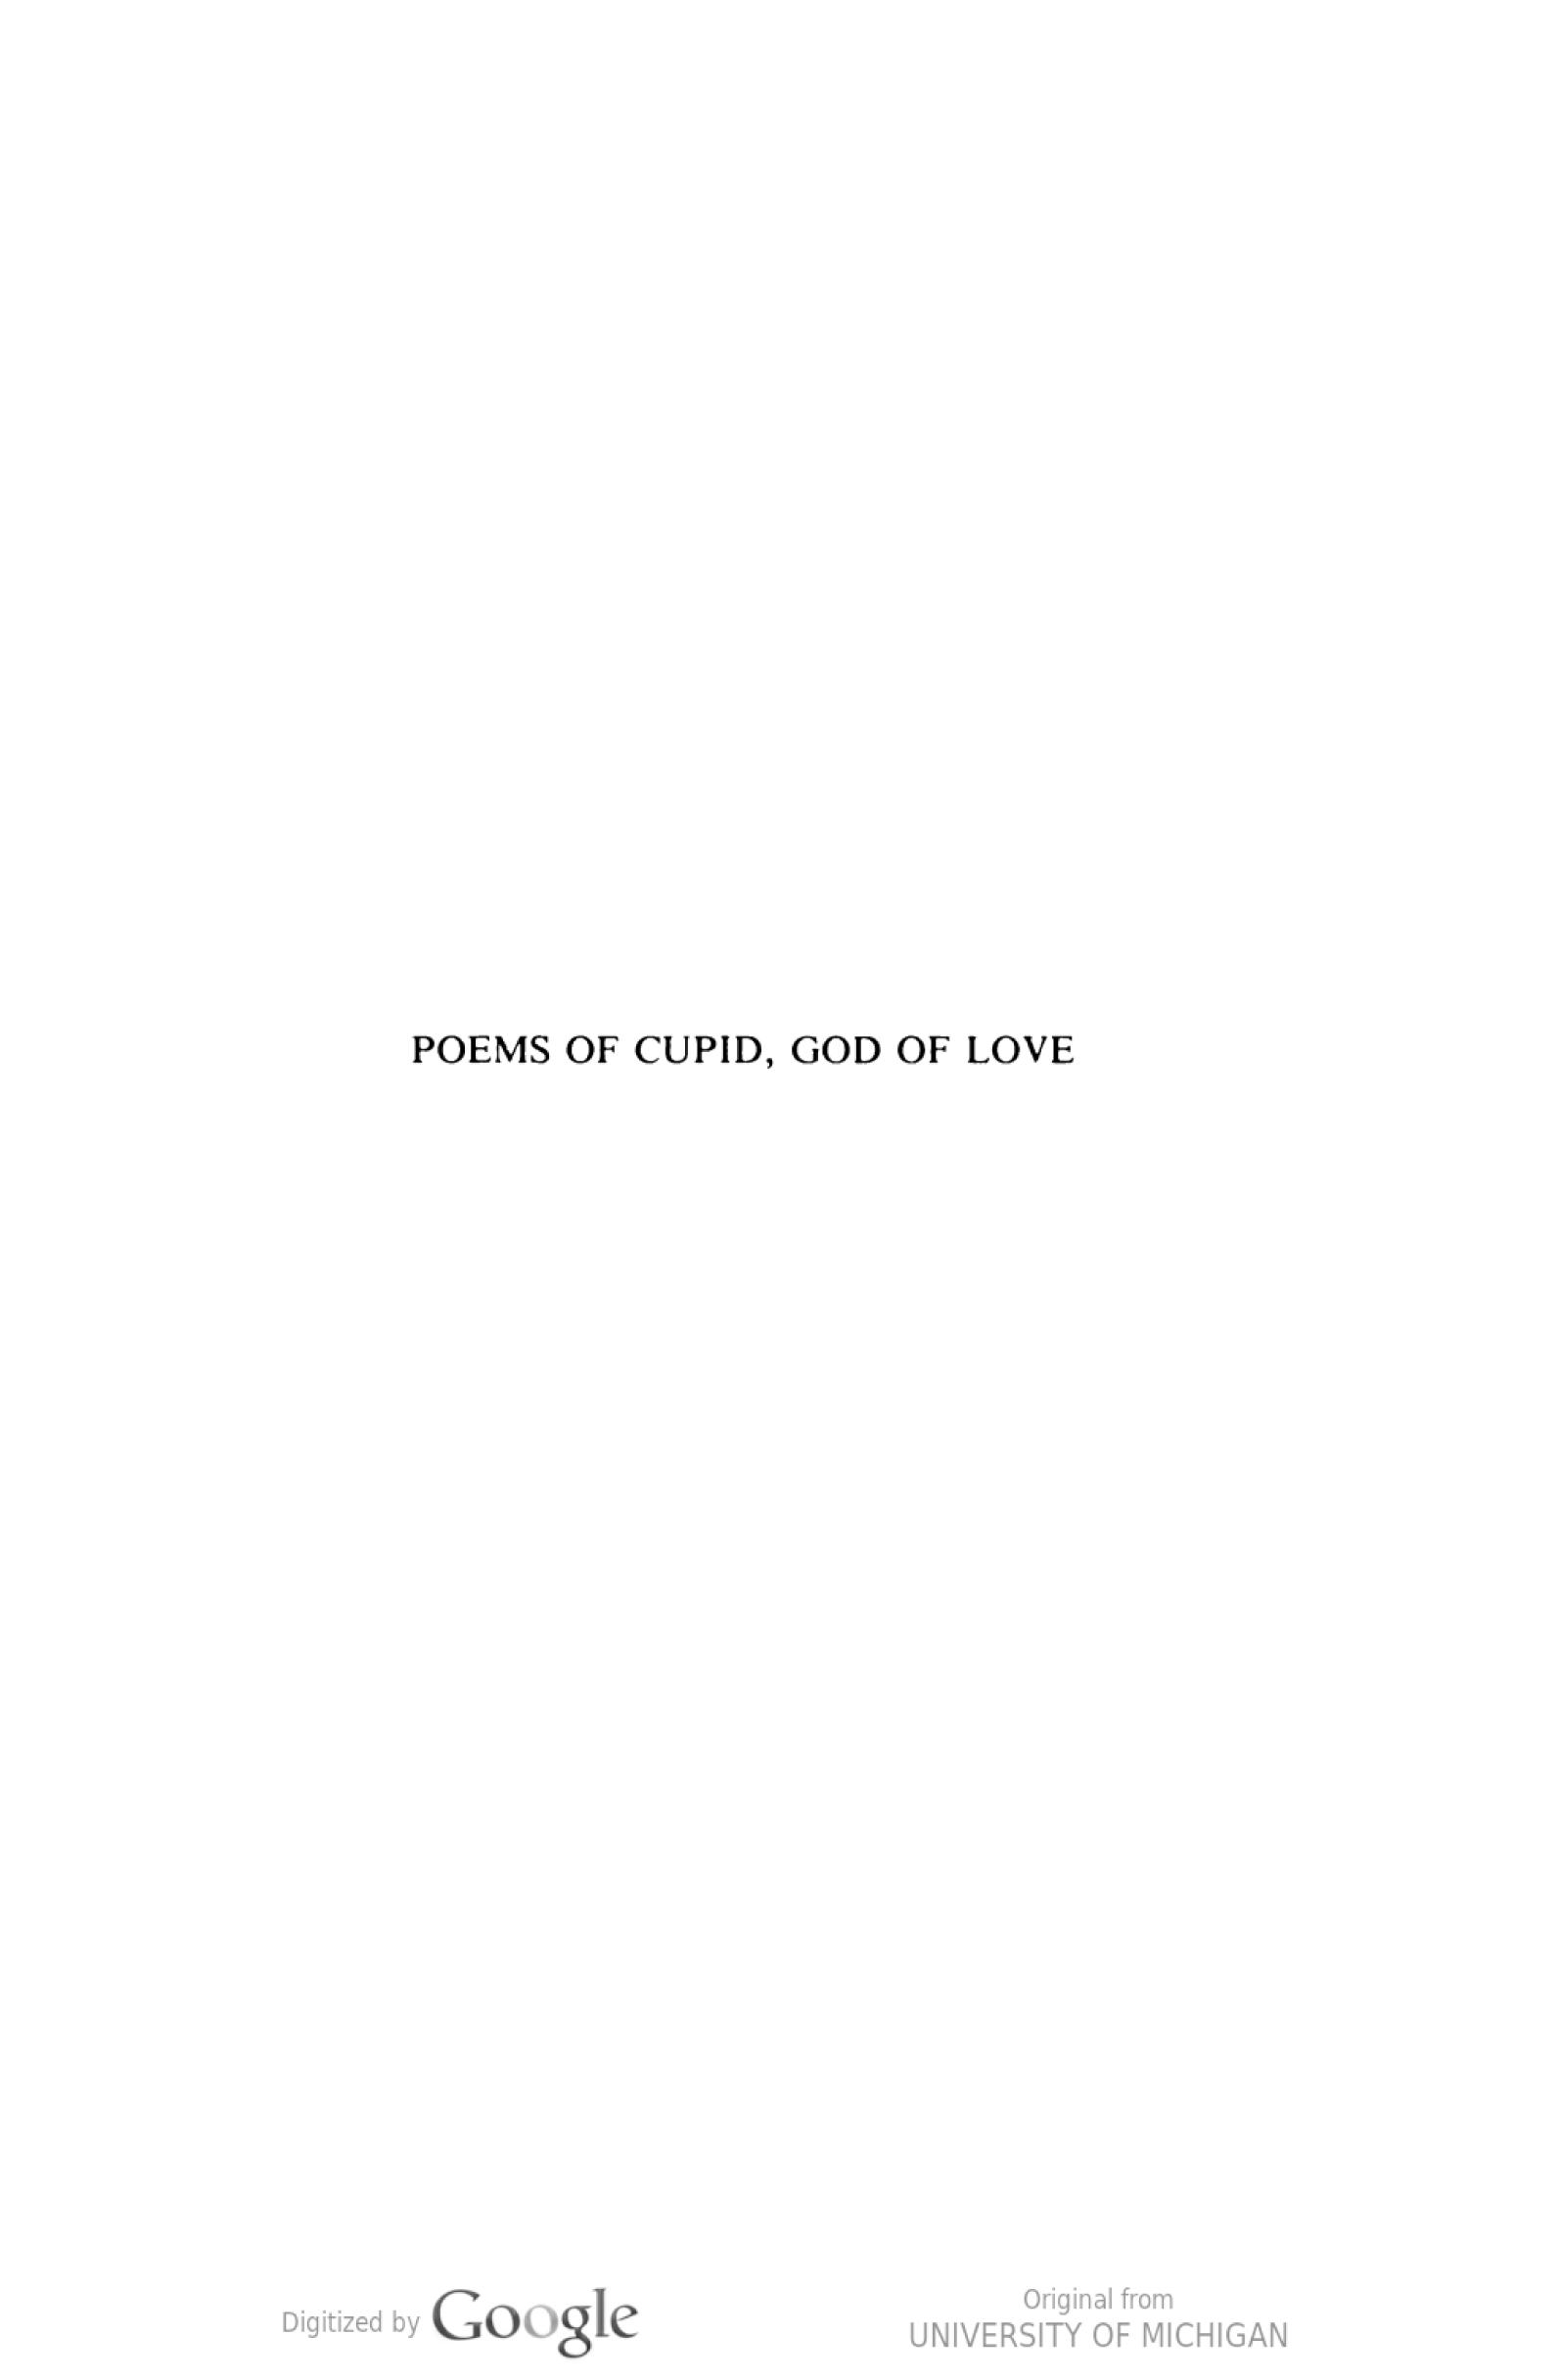 Poems Of Cupid, God Of Love